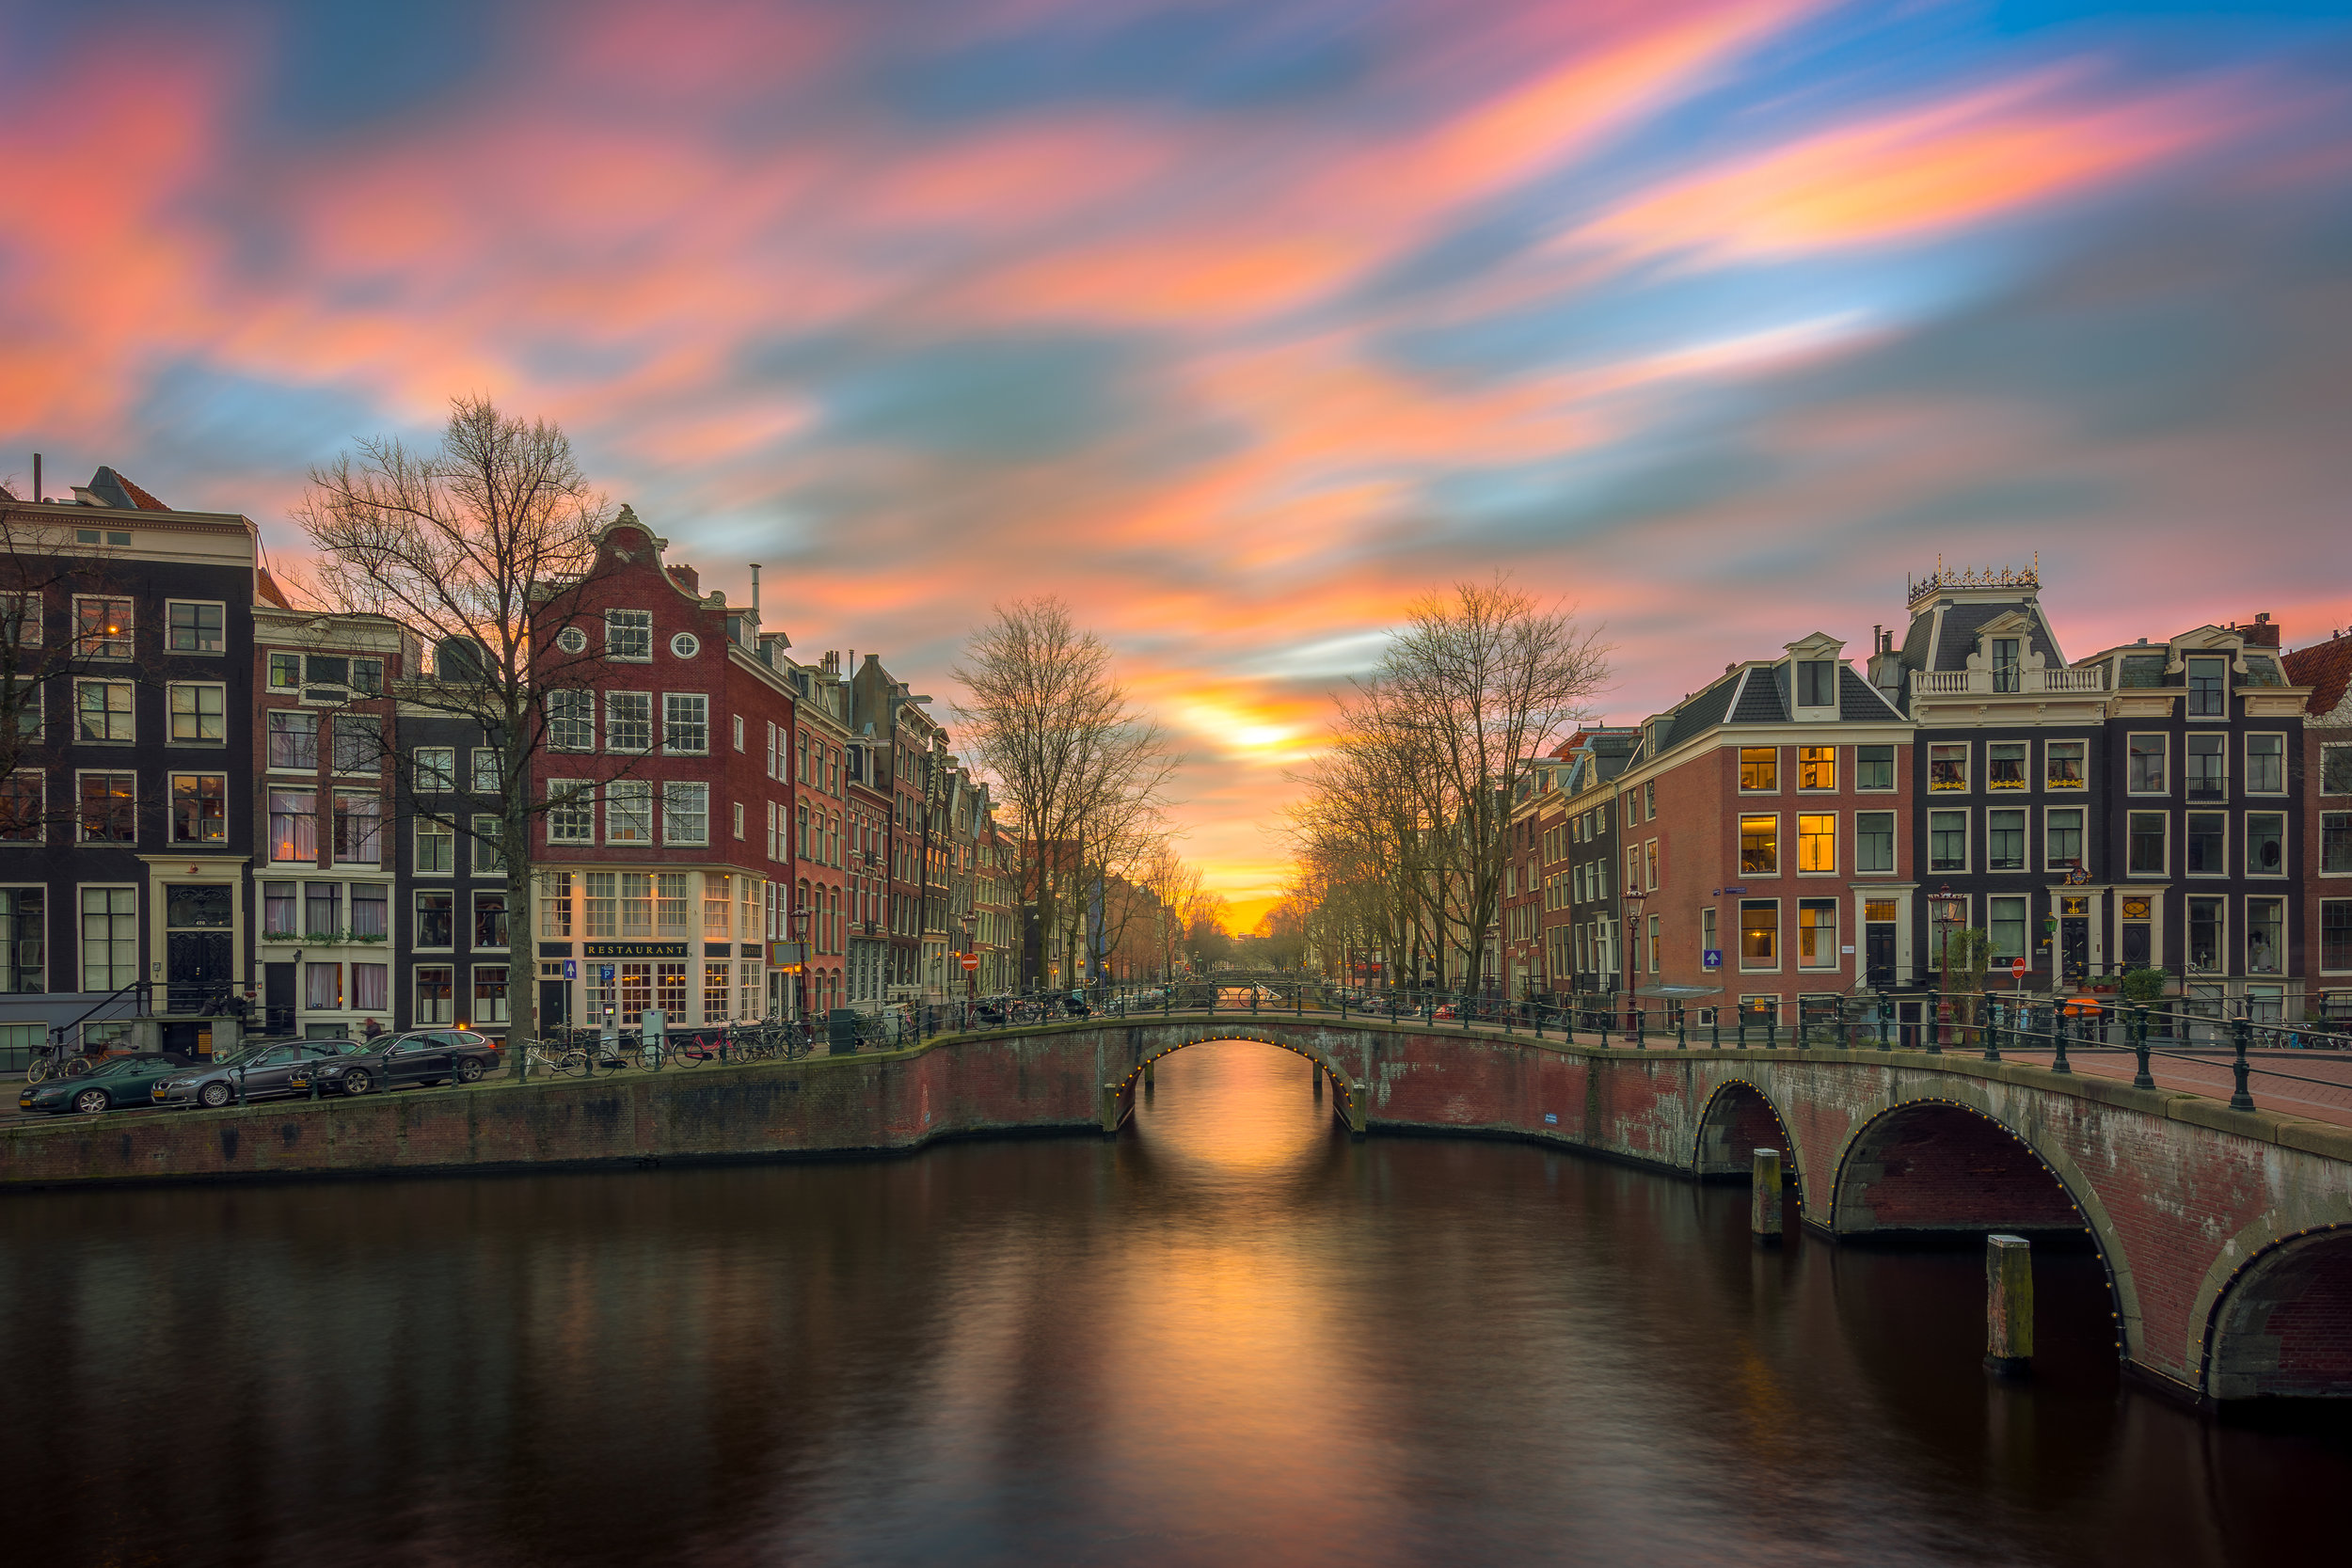 10 Pictures of The Netherlands That Will Make You Want to Visit Now